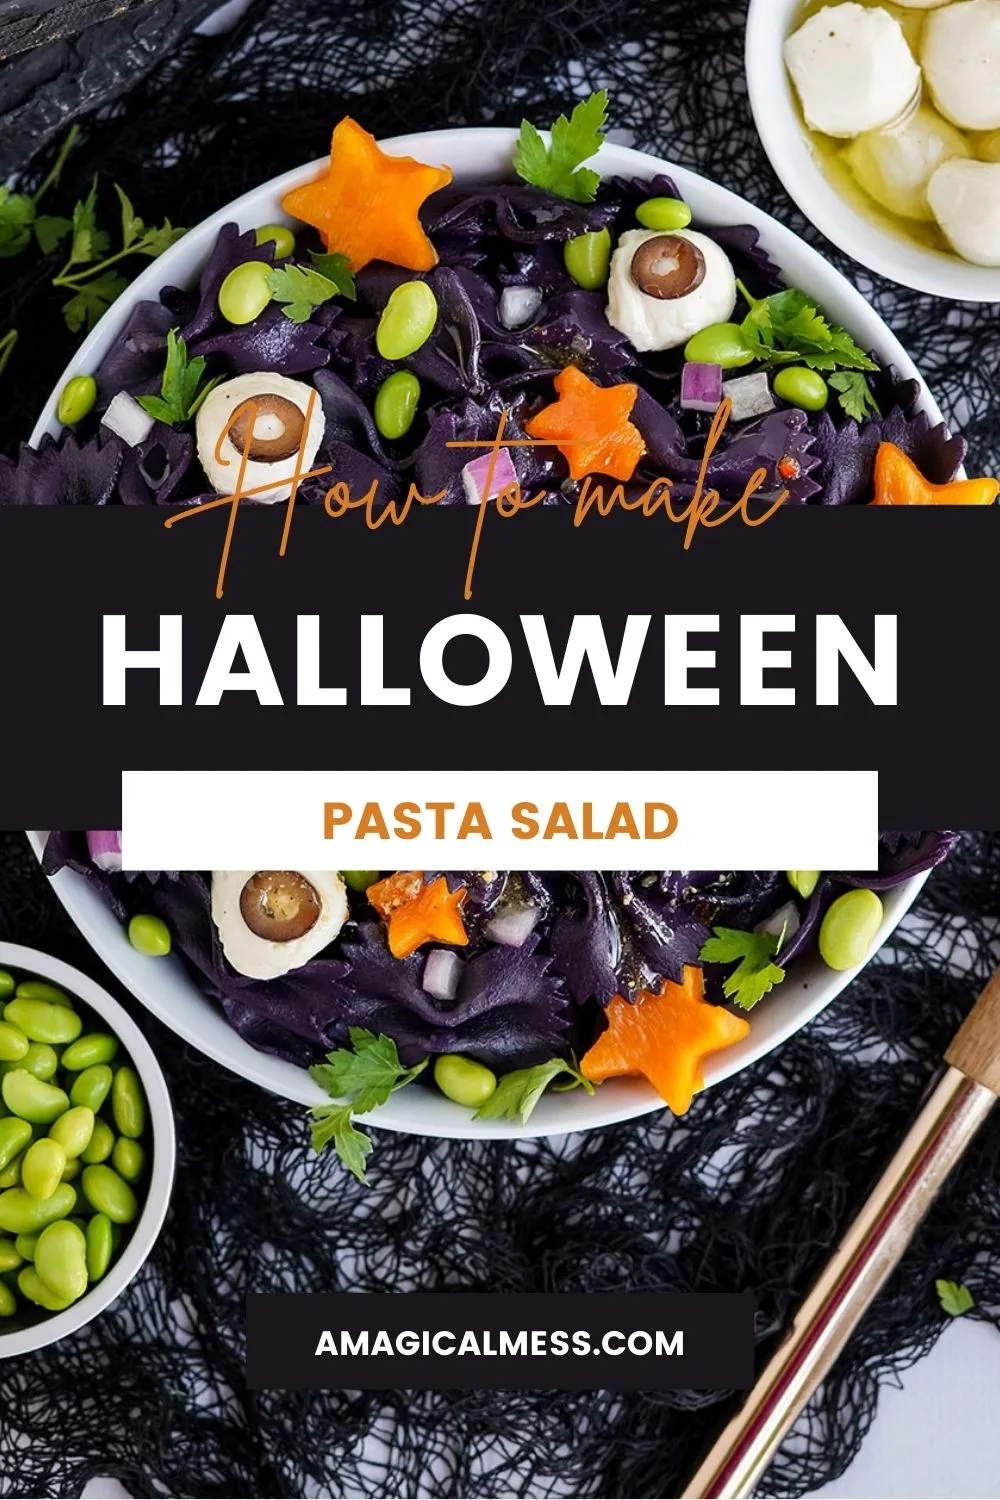 Bowl of pasta salad that looks spooky for Halloween.